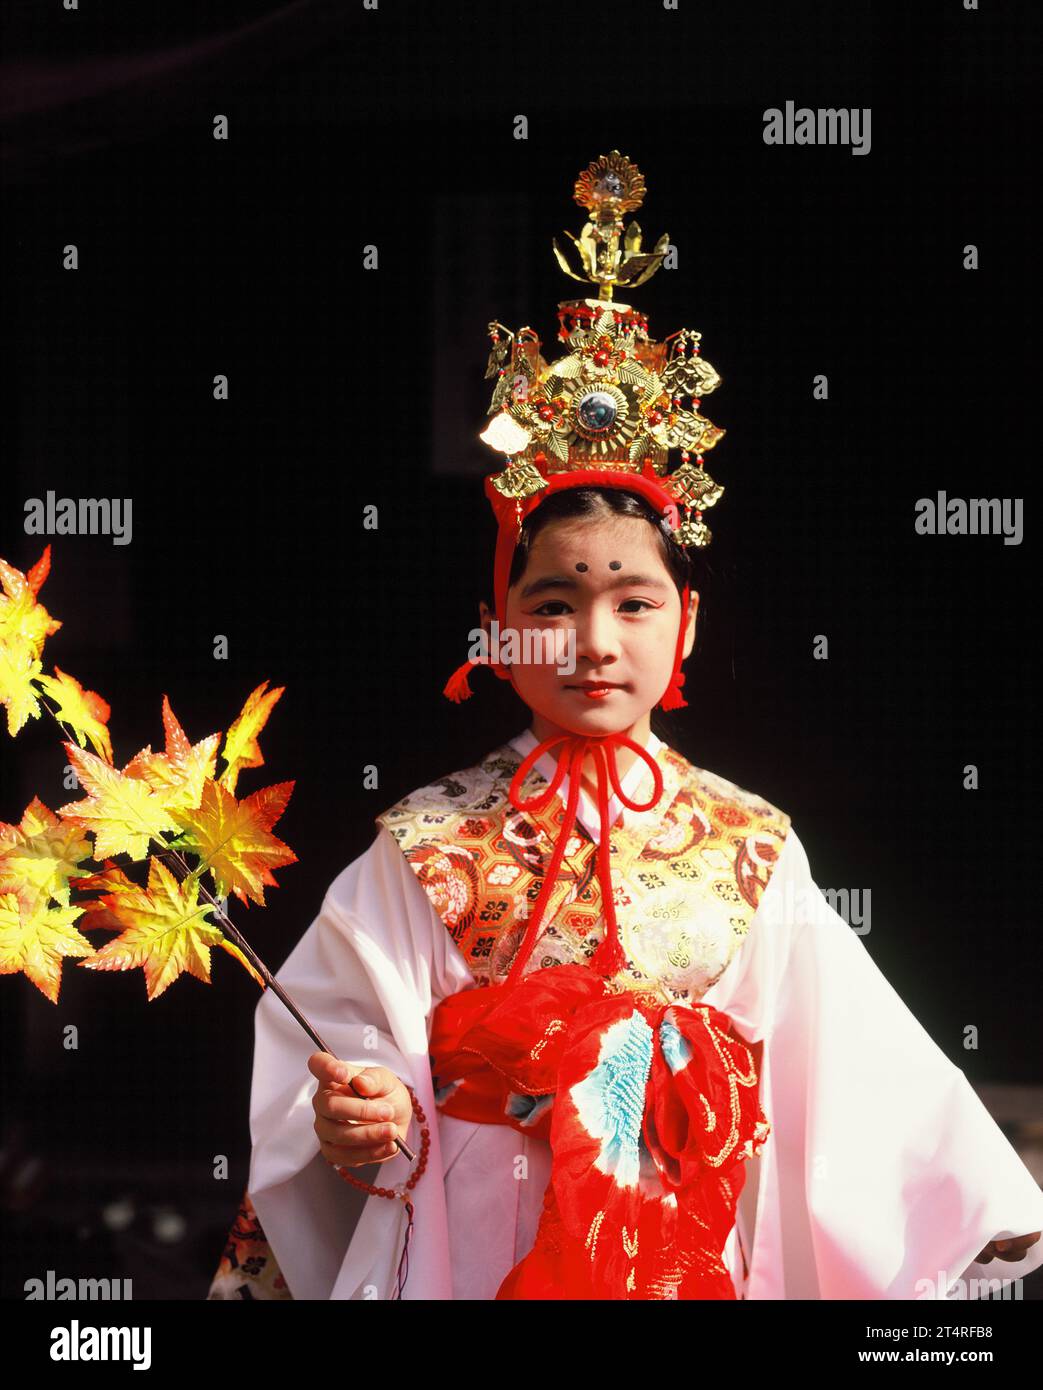 Japan. Tokyo. Autumn Festival. Local girl in traditional dress holding Maple branch. Stock Photo